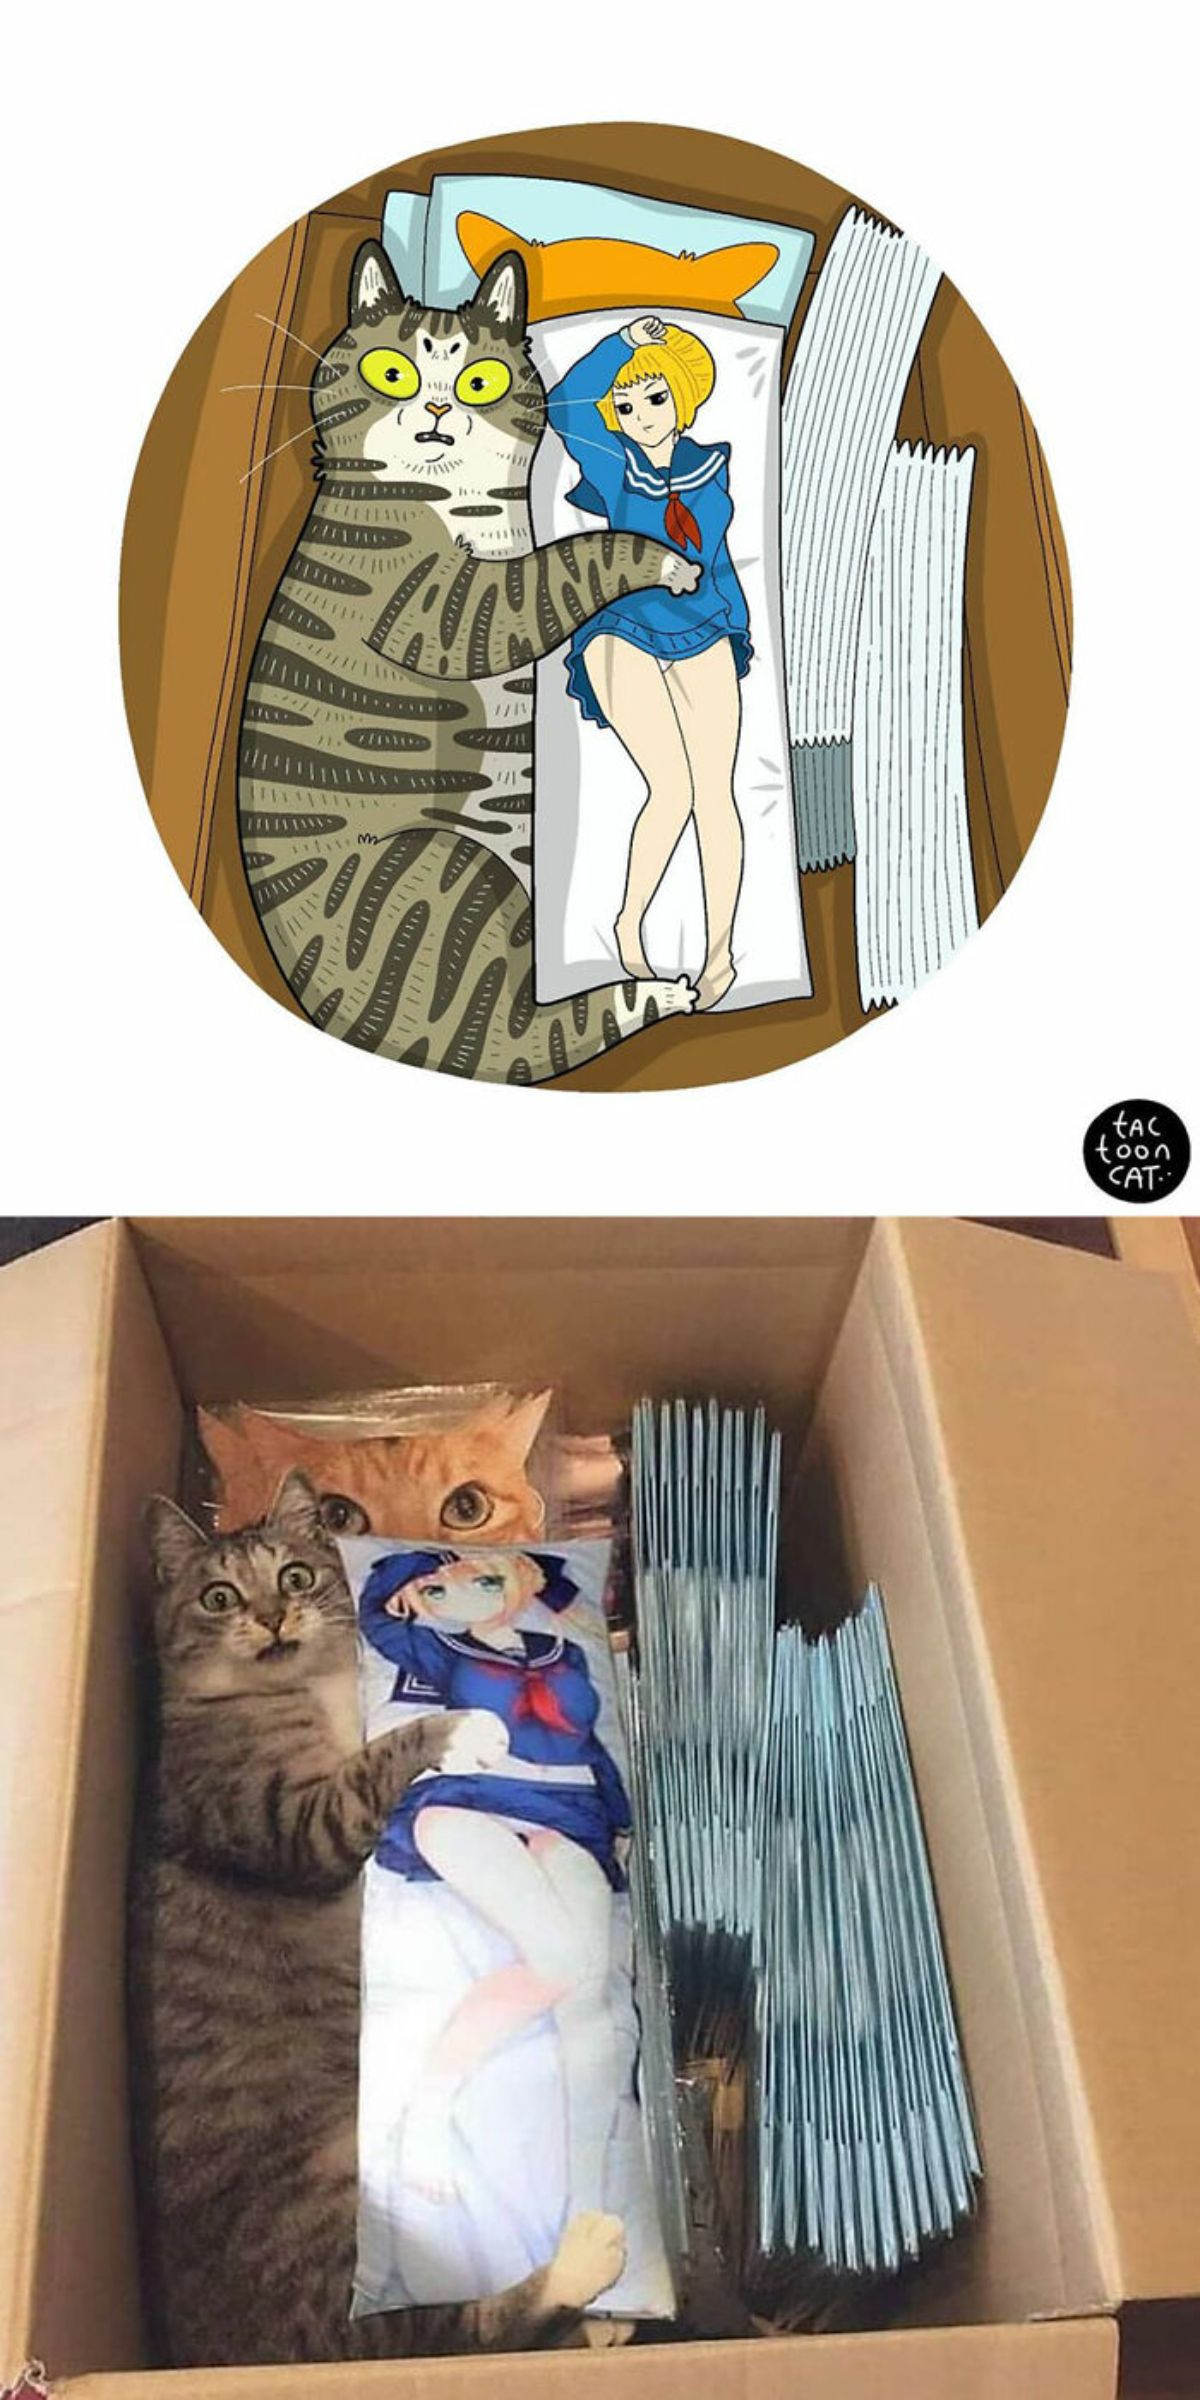 cartoon photo and real photo of a grey tabby sideways in a carboard box holding a cushion with an anime girl